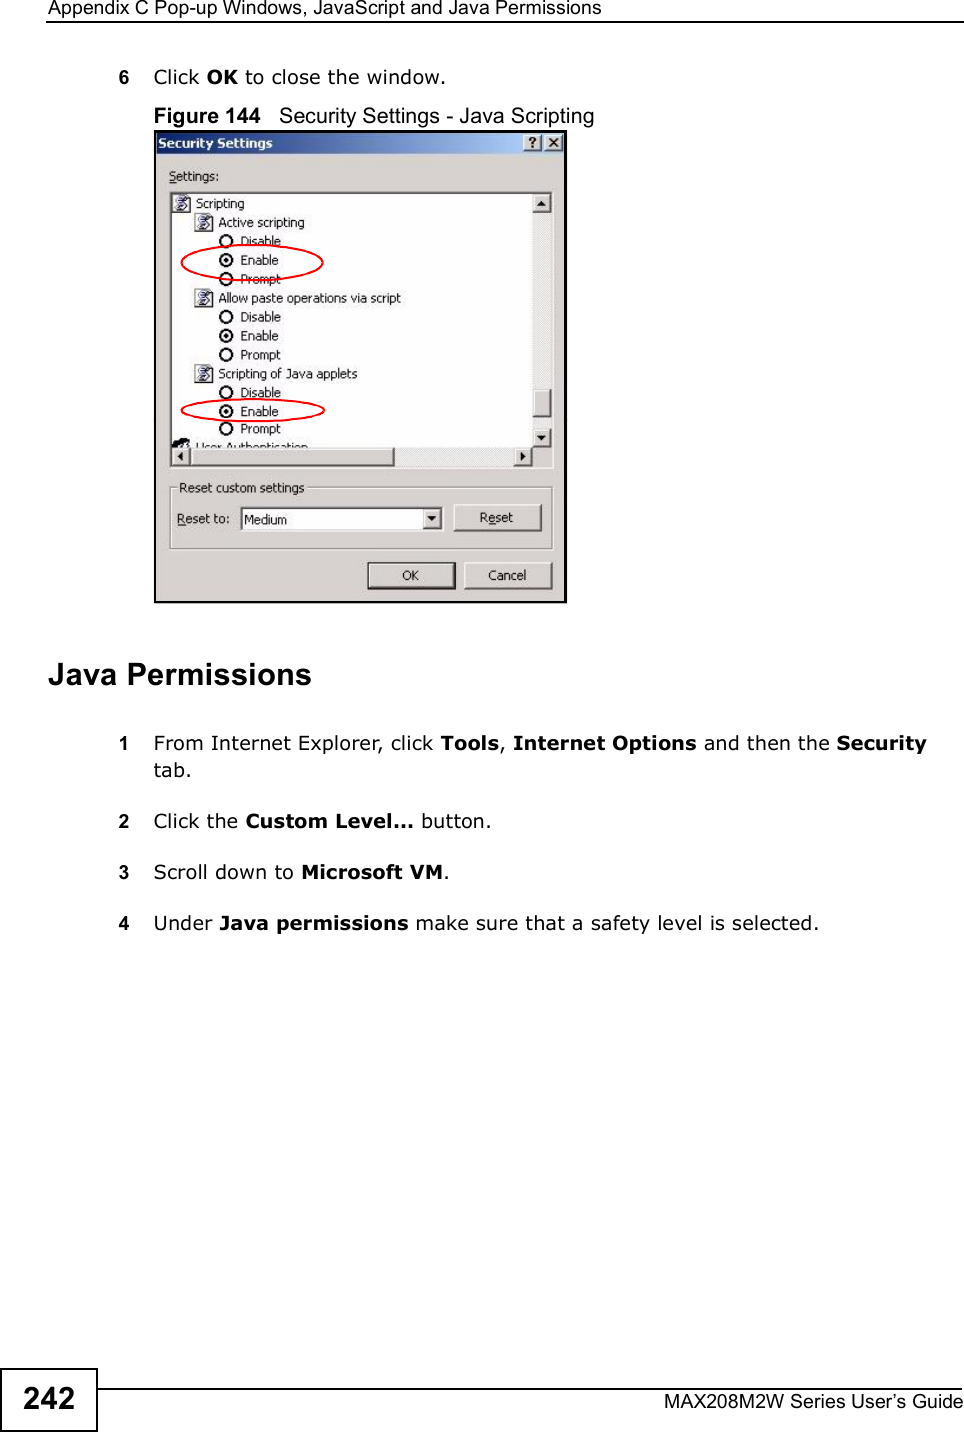 Appendix CPop-up Windows, JavaScript and Java PermissionsMAX208M2W Series User s Guide2426Click OK to close the window.Figure 144   Security Settings - Java ScriptingJava Permissions1From Internet Explorer, click Tools, Internet Options and then the Security tab. 2Click the Custom Level... button. 3Scroll down to Microsoft VM. 4Under Java permissions make sure that a safety level is selected.